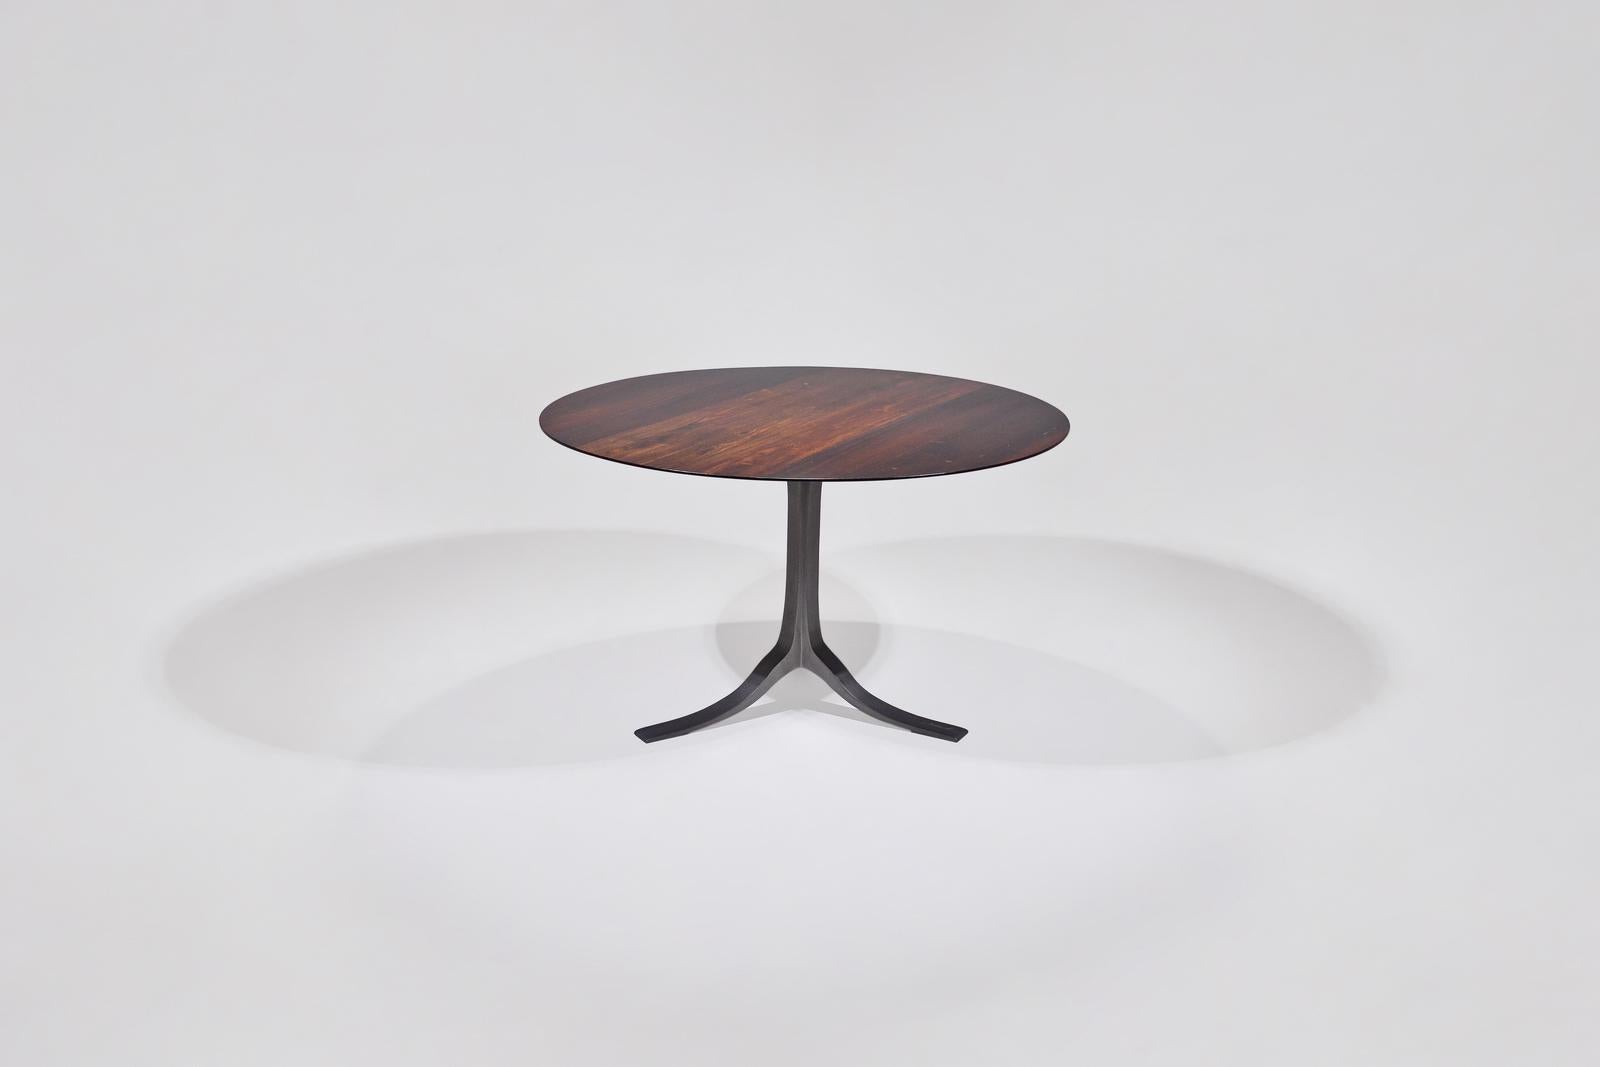 A versatile round table created from reclaimed Makha Tae wood that was once a supporting column of a rice granary. The deep dark tone of the Makha Tae wood set to match with brushed charcoal aluminum base. With a thin sleek beveled profile, the